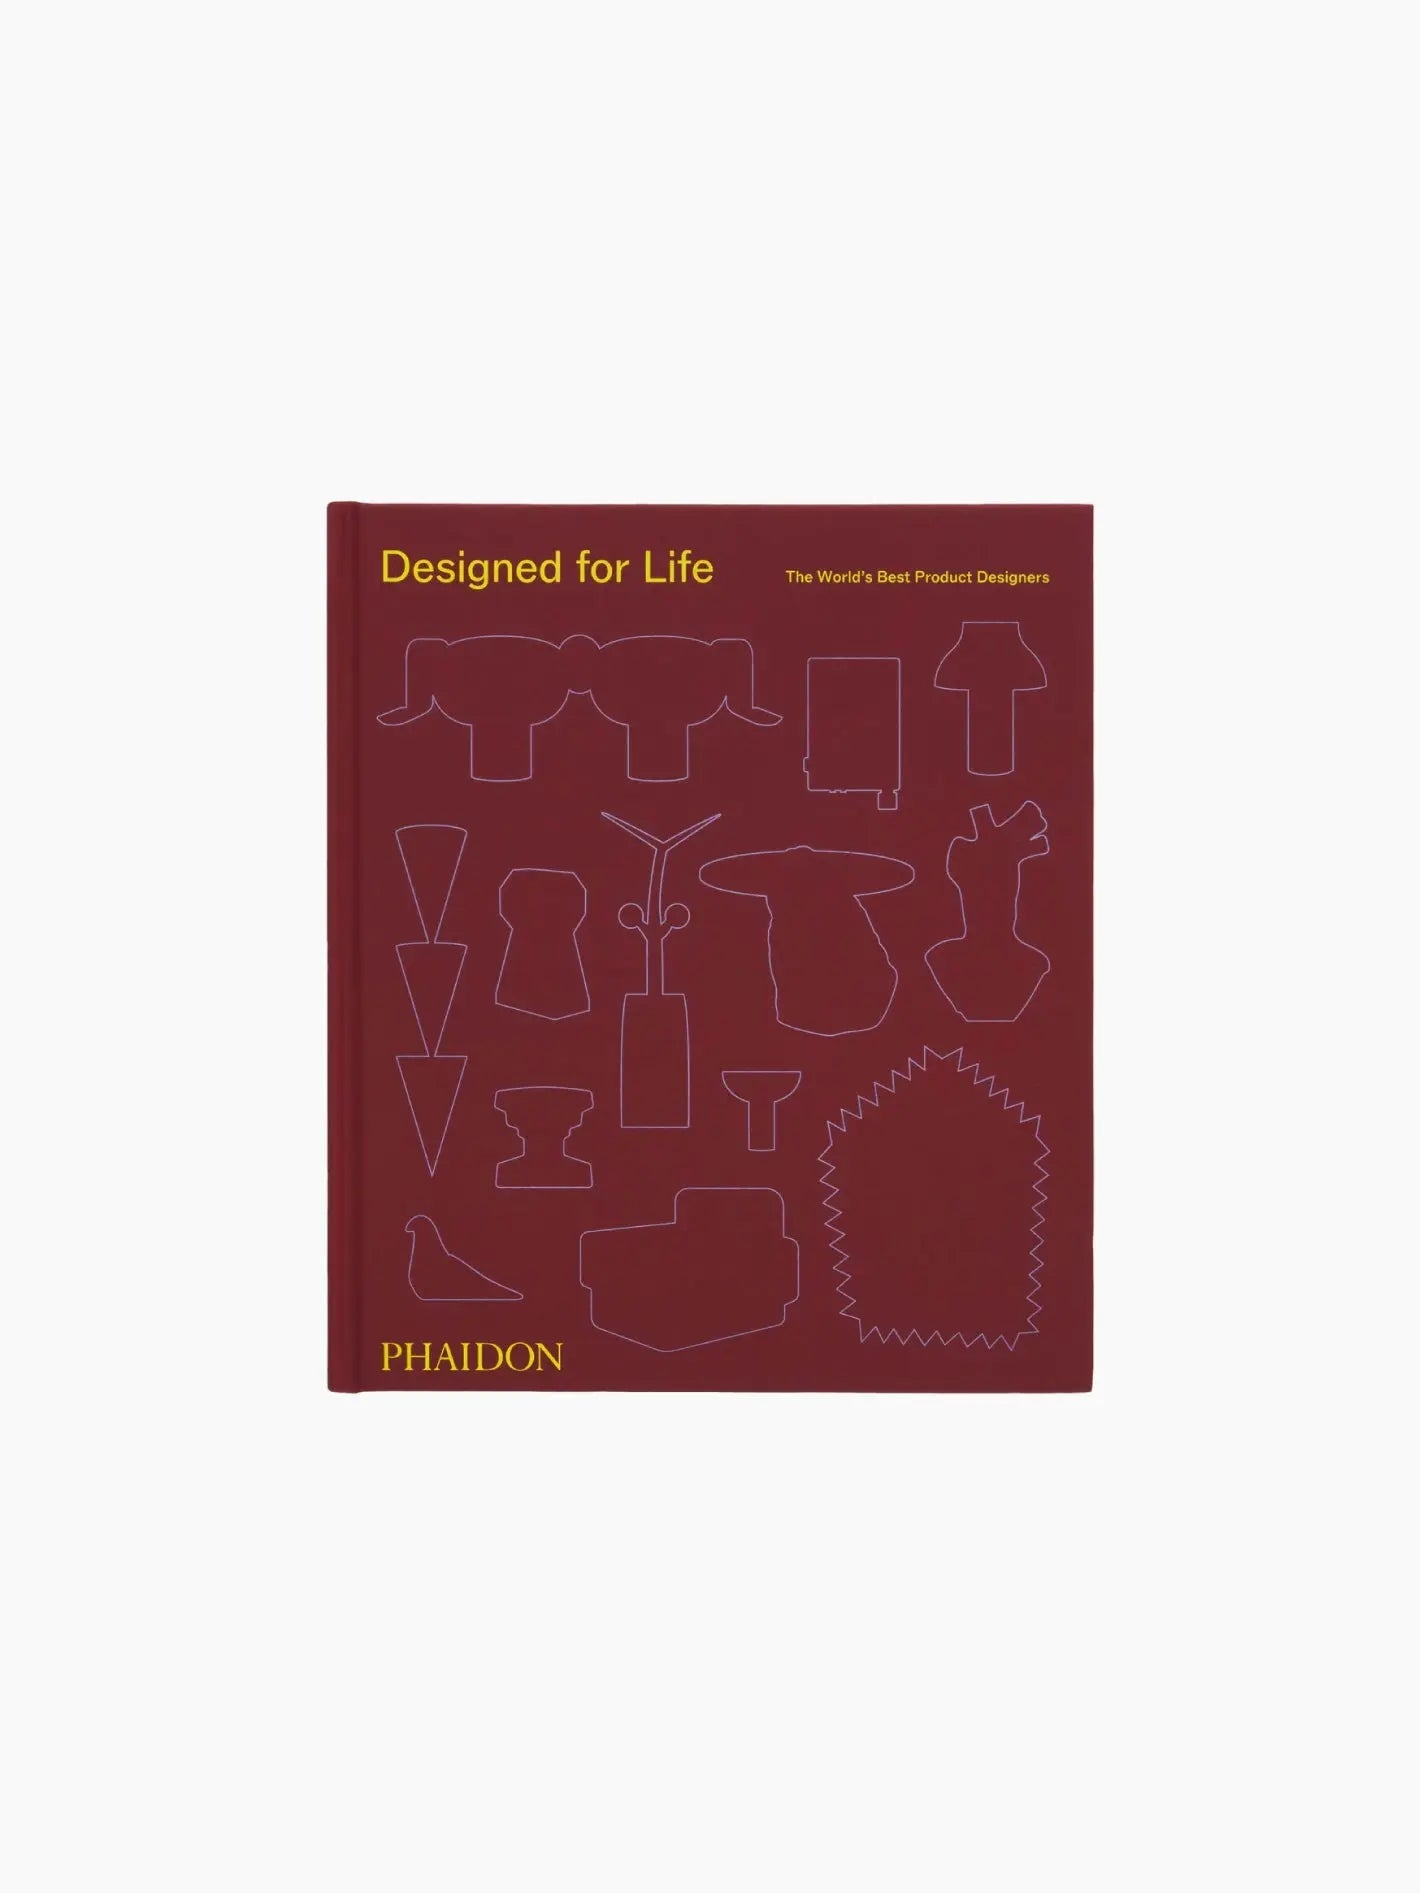 The image shows a maroon book titled "Designed for Life: The World’s Best Product Designers" by Phaidon. Available at BassalStore in Barcelona, the cover features various thin white outlines of abstract shapes and product designs.